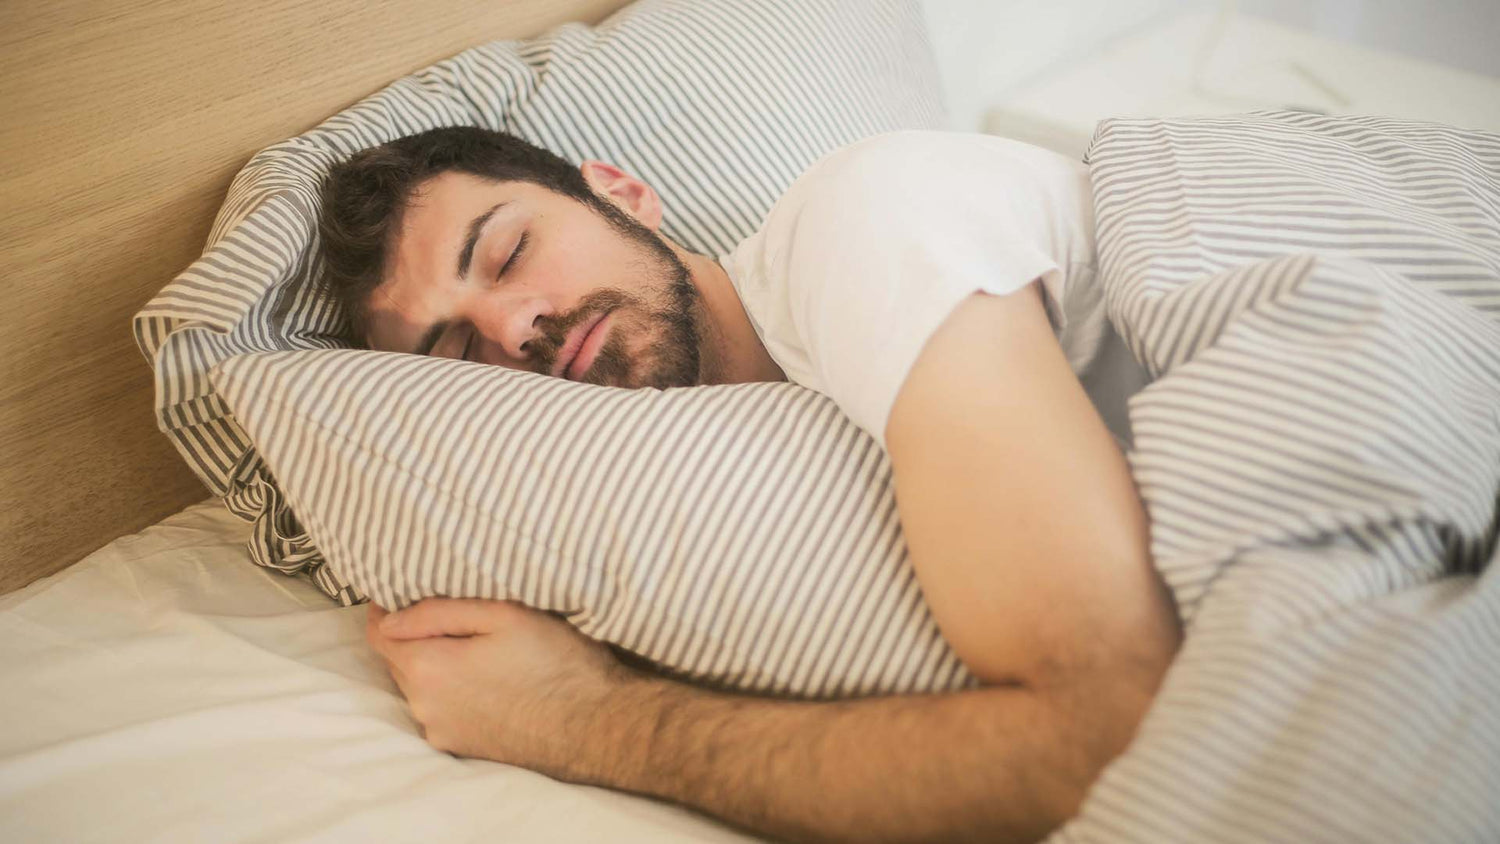 man sleeping peacefully on his side while hugging a pillow